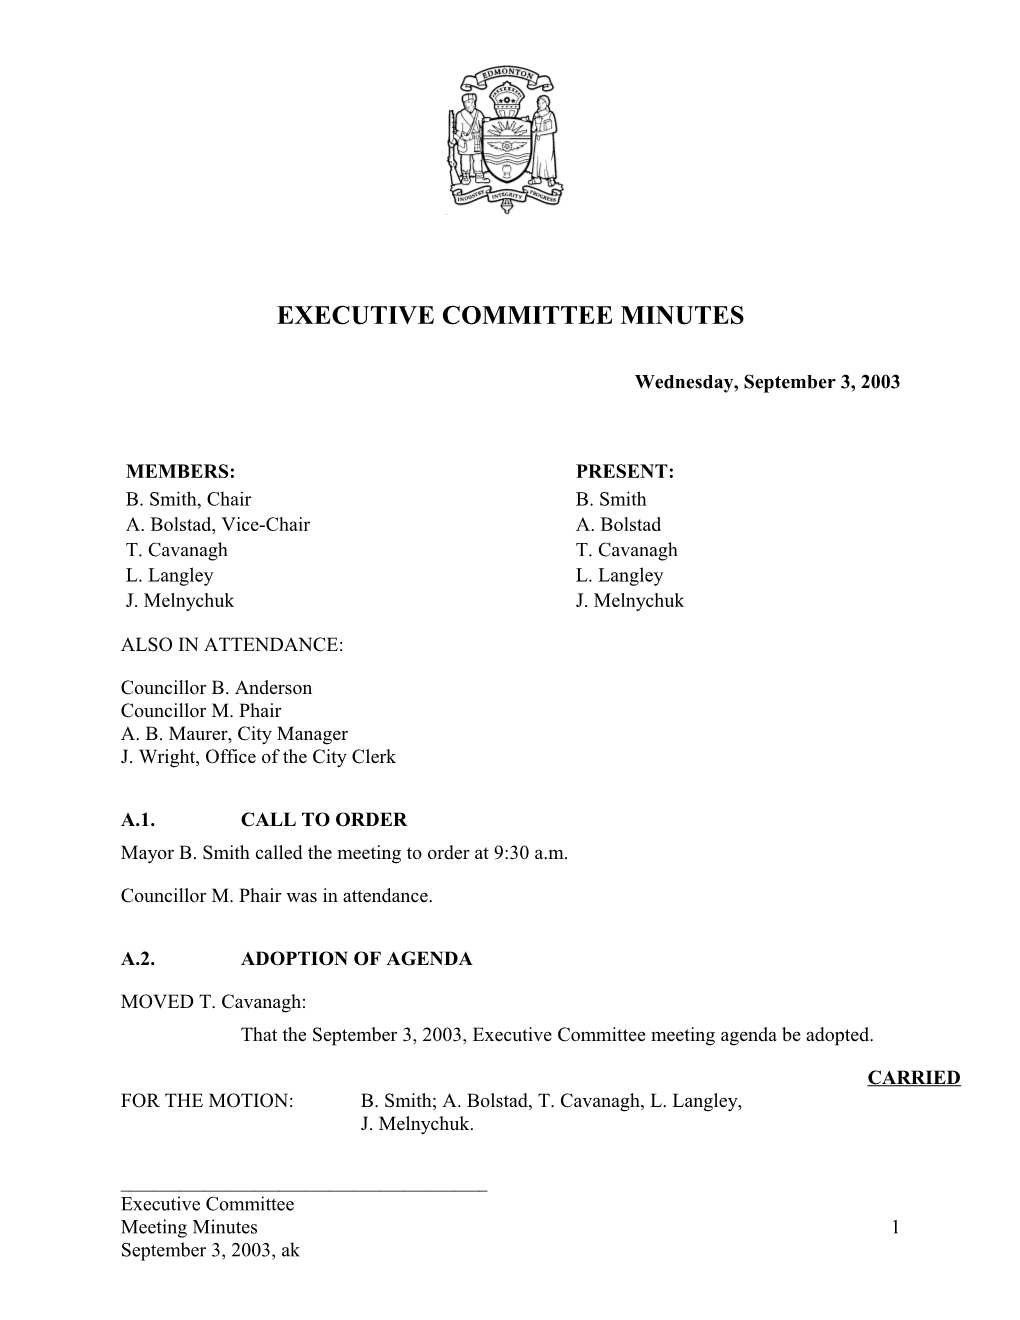 Minutes for Executive Committee September 3, 2003 Meeting